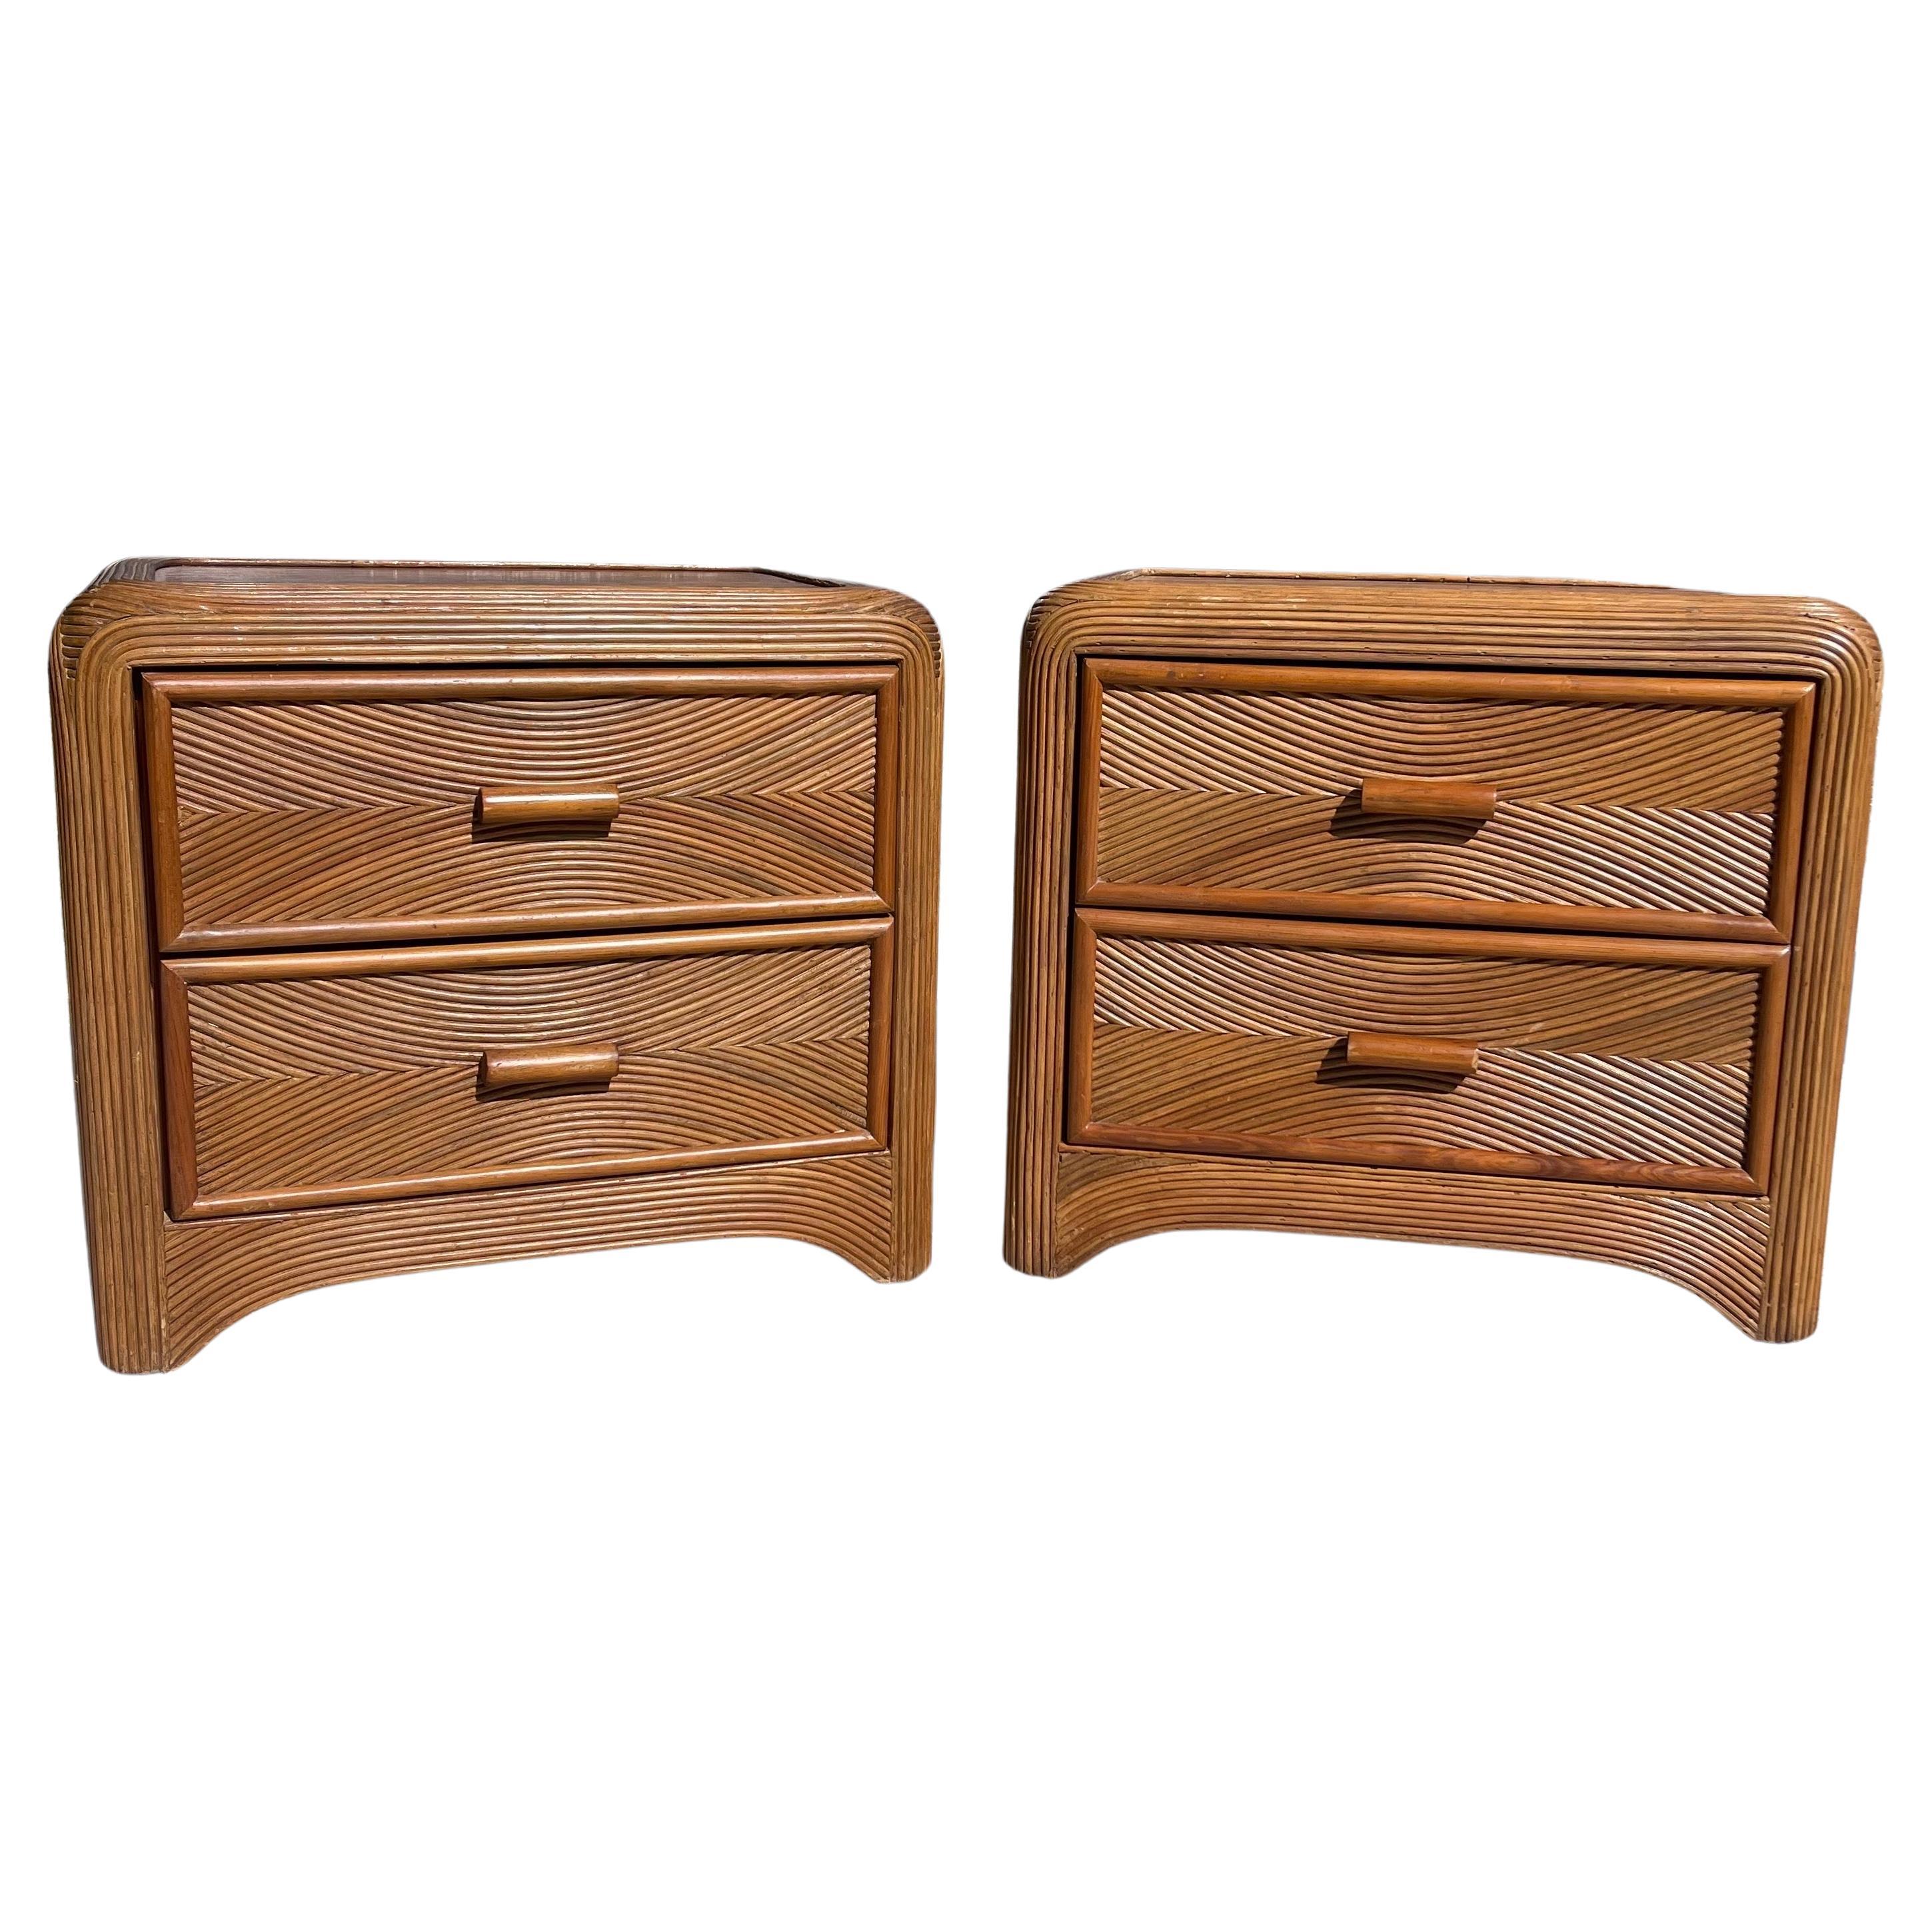 Vintage Coastal Pencil Reed Nightstand Tables w/ Drawers, a Pair For Sale